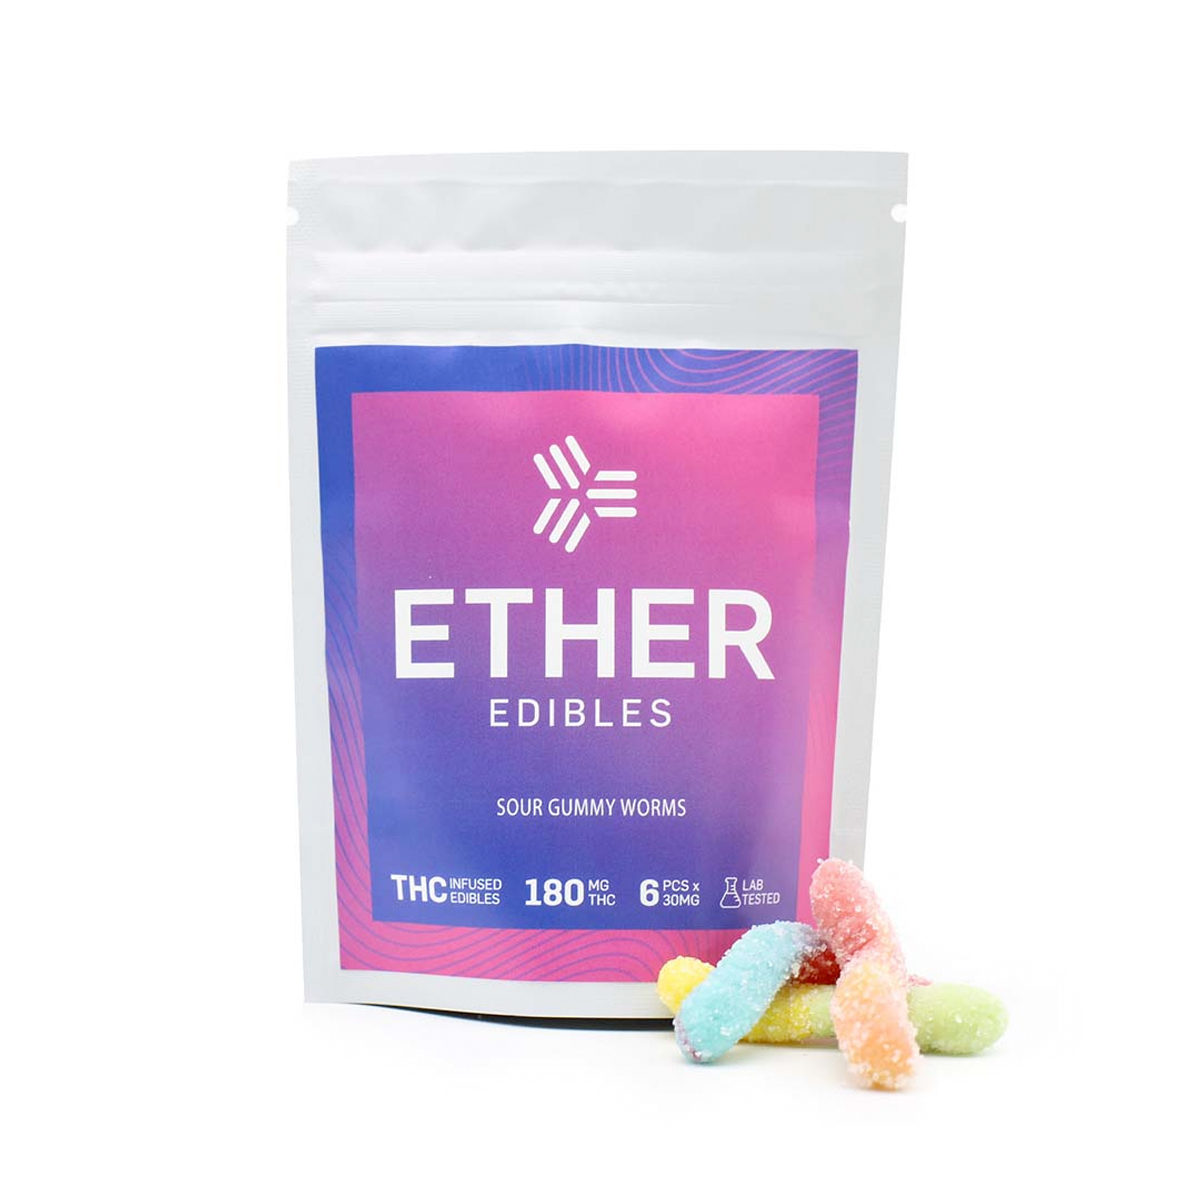 BUy Ether Edibles Sour Gummy Worms - 180mg Online